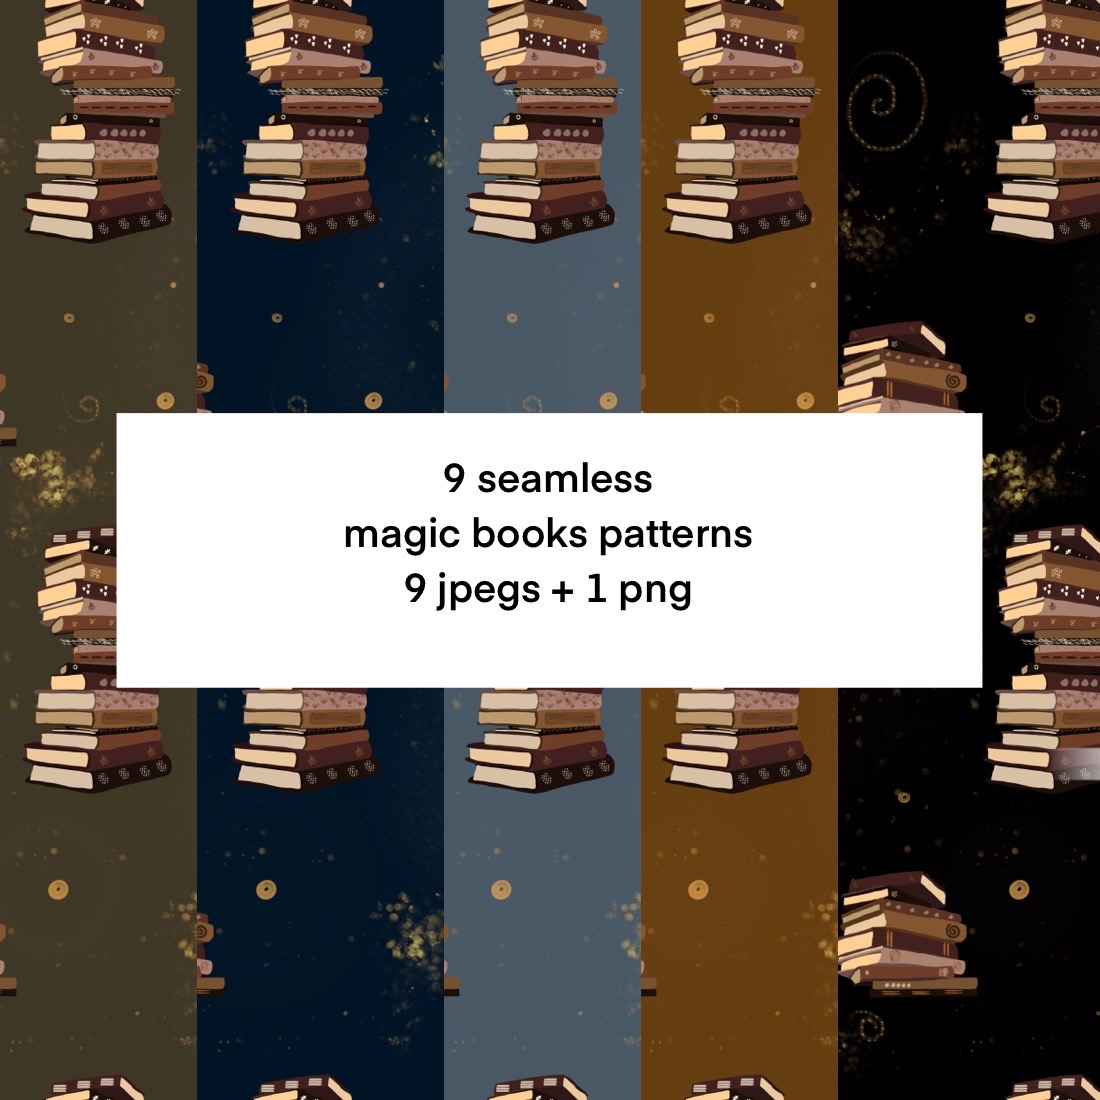 9 Seamless Magic Books Patterns cover image.